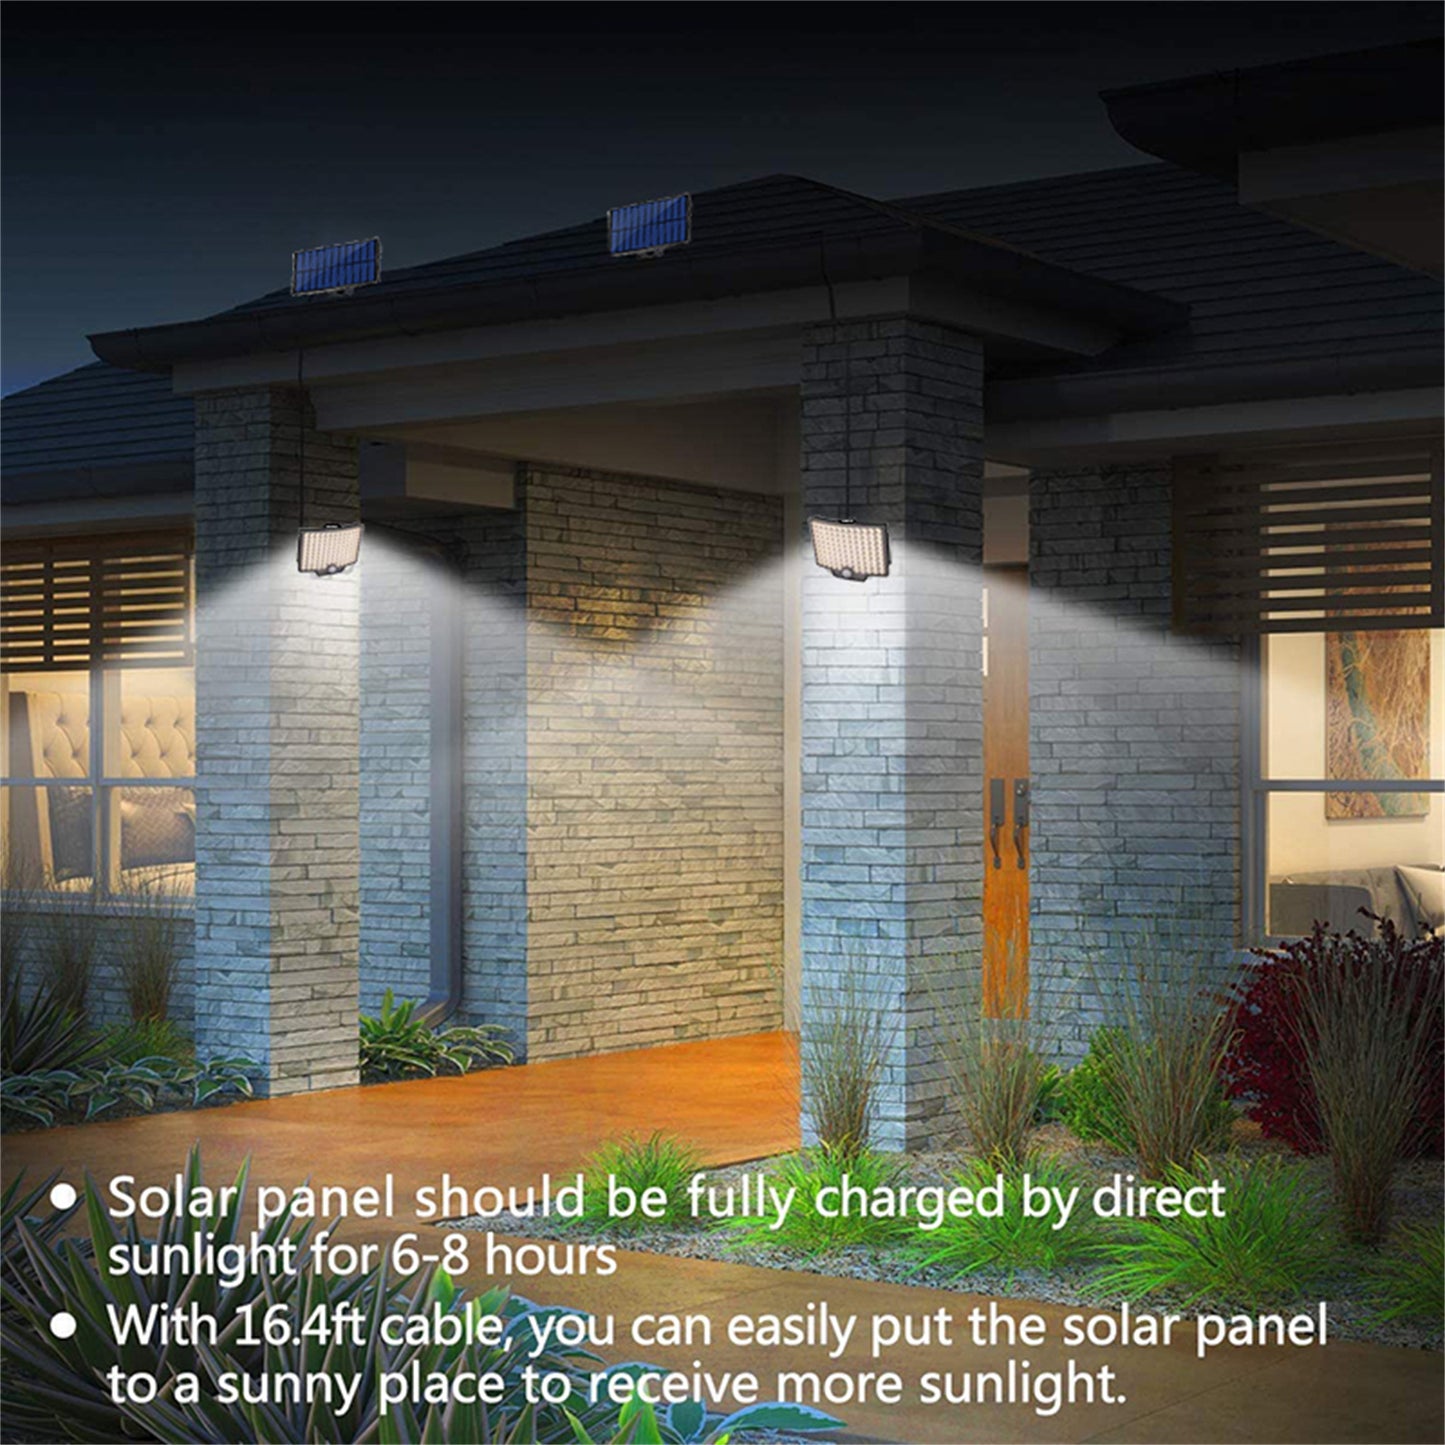 Solar Wall Lamp, 3000LM Solar Light With Remote Control Waterproof Solar Motion Sensor Lights Outdoor, 270° Wide Angle Illumination Security Light Garage Yard Garden Patio, 2 Pack